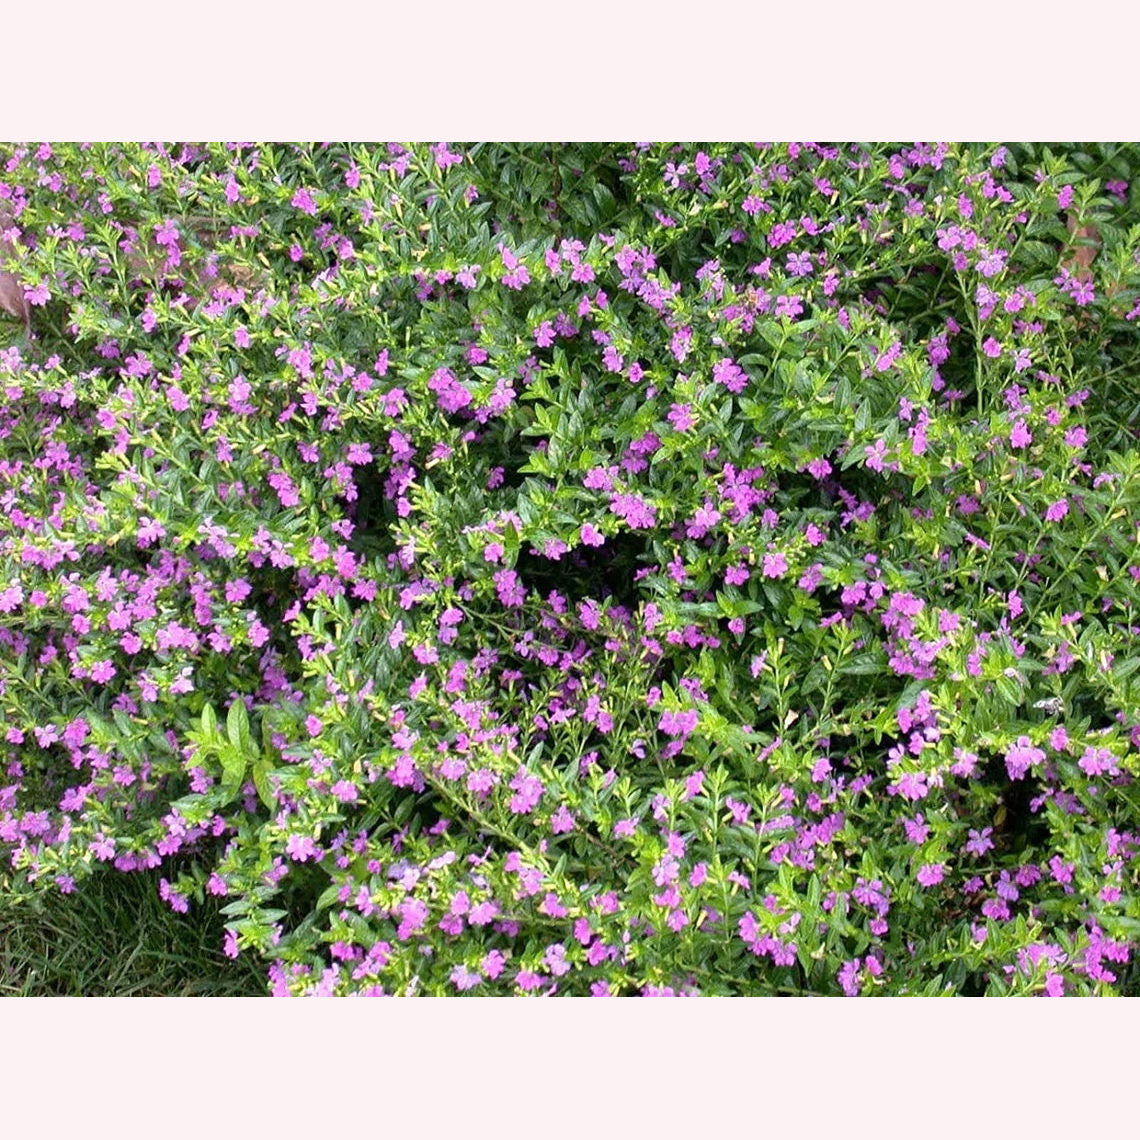 Mexican Heather blooms.